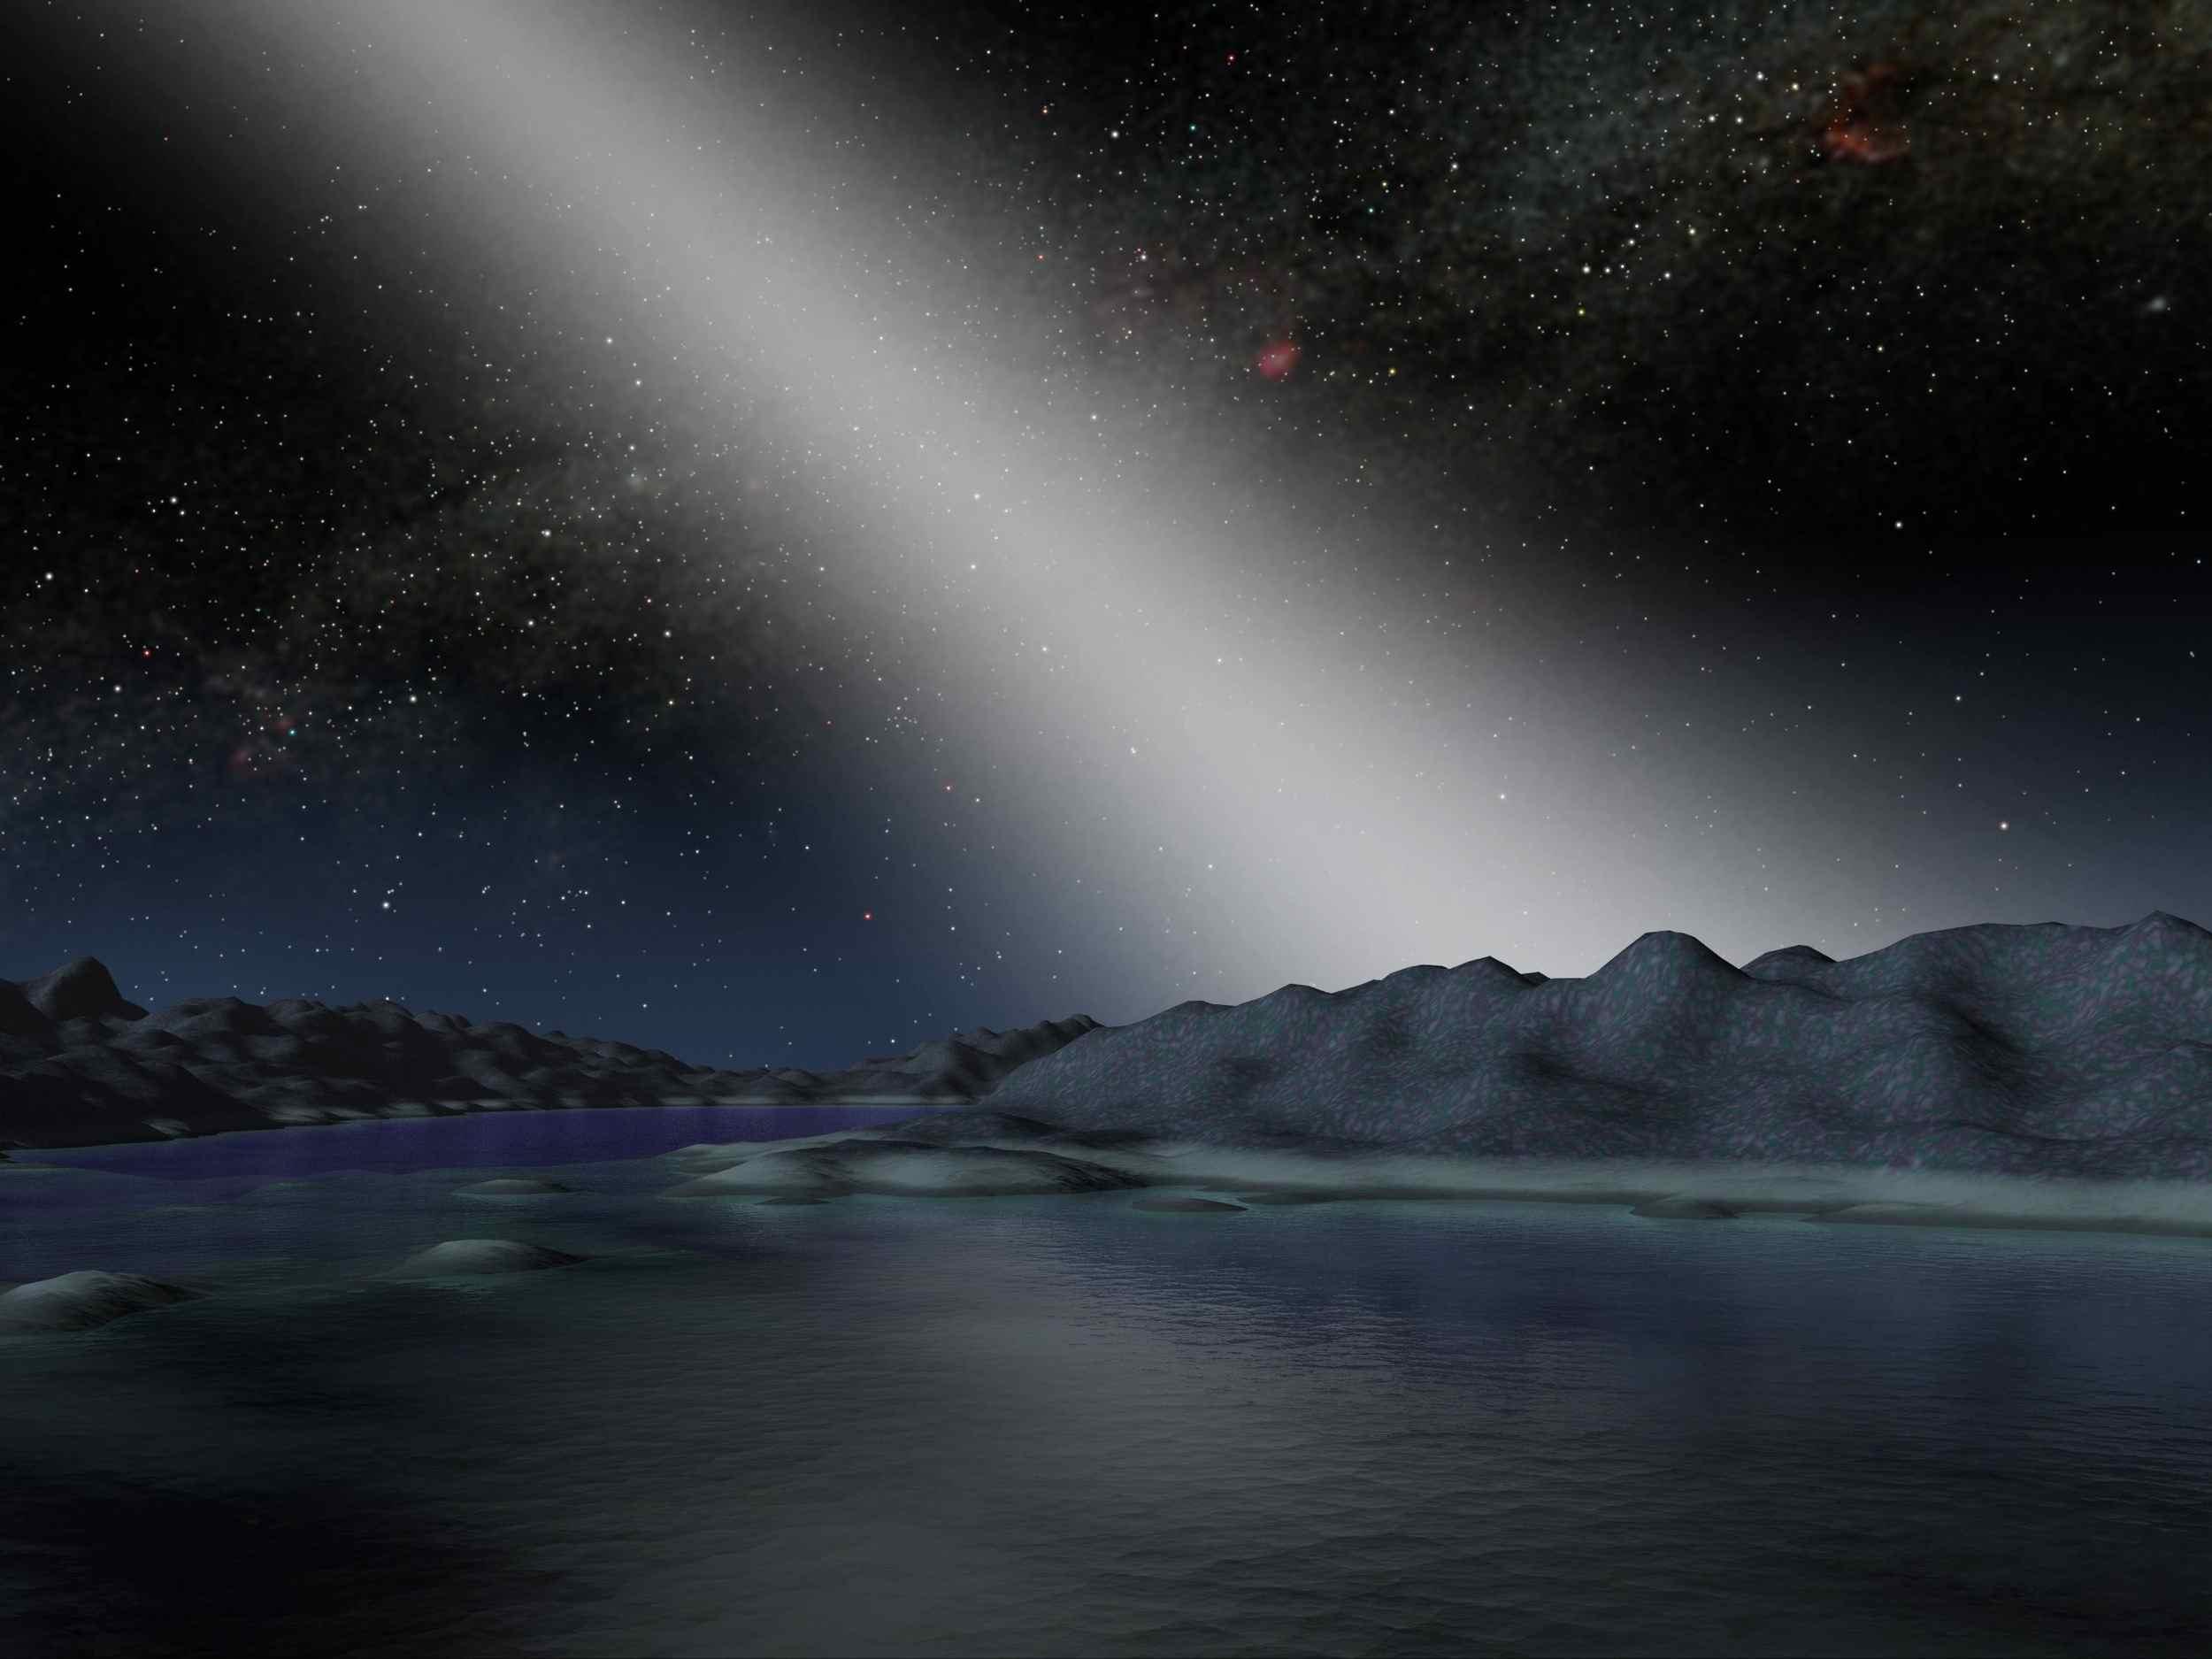 Space Image. Alien Asteroid Belt Compared to our Own (Artist Concept)